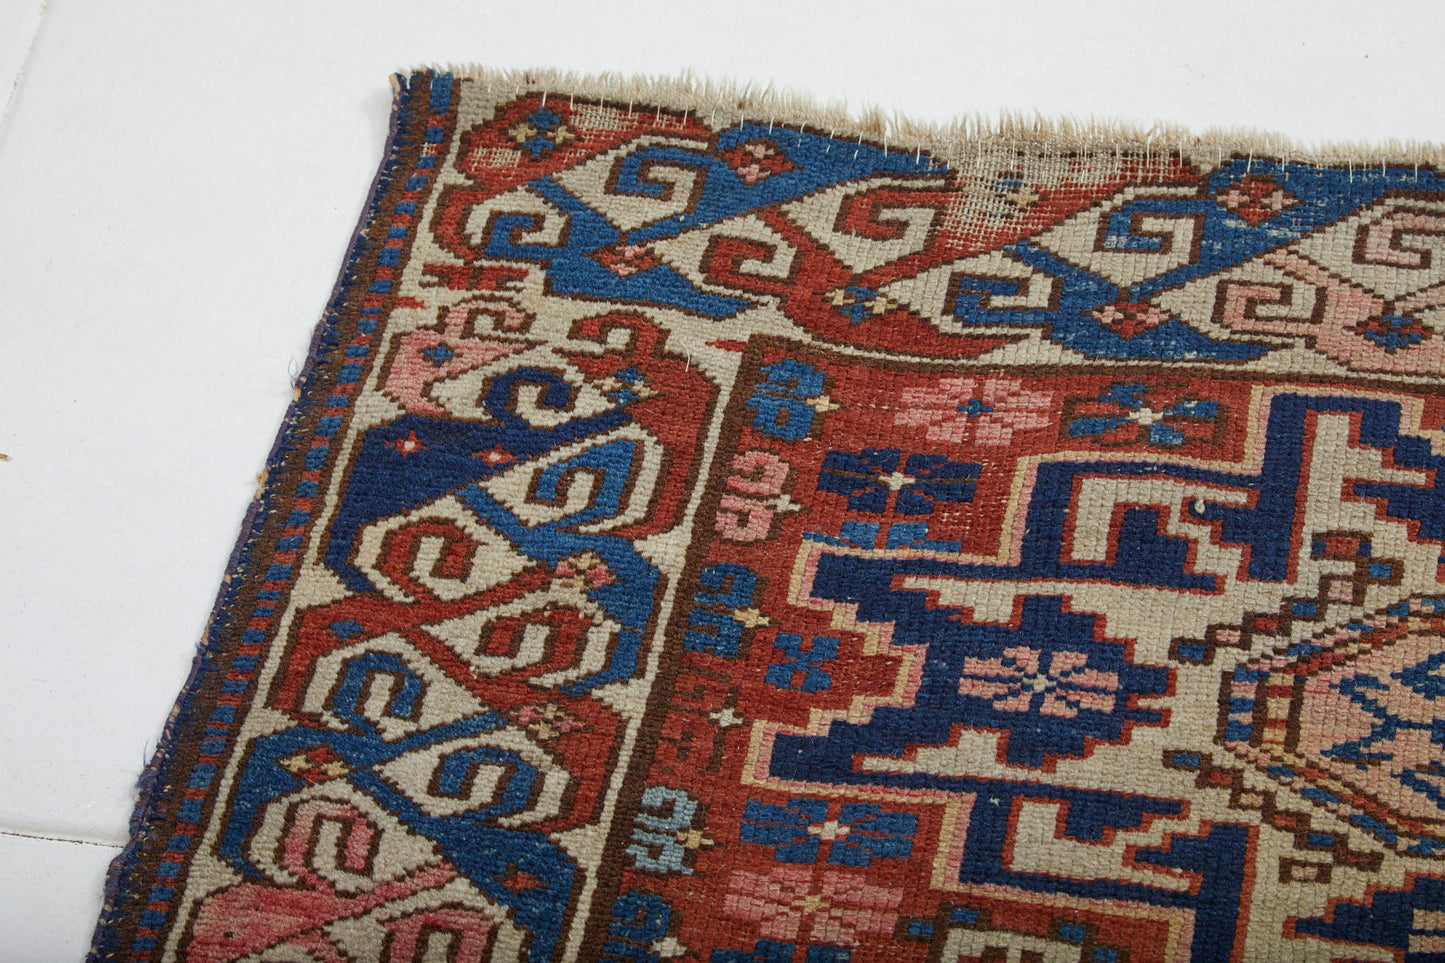 Detail of antique hand woven Persian rug with cream and blue star and flower shapes on red base - Available from King Kennedy Rugs Los Angeles